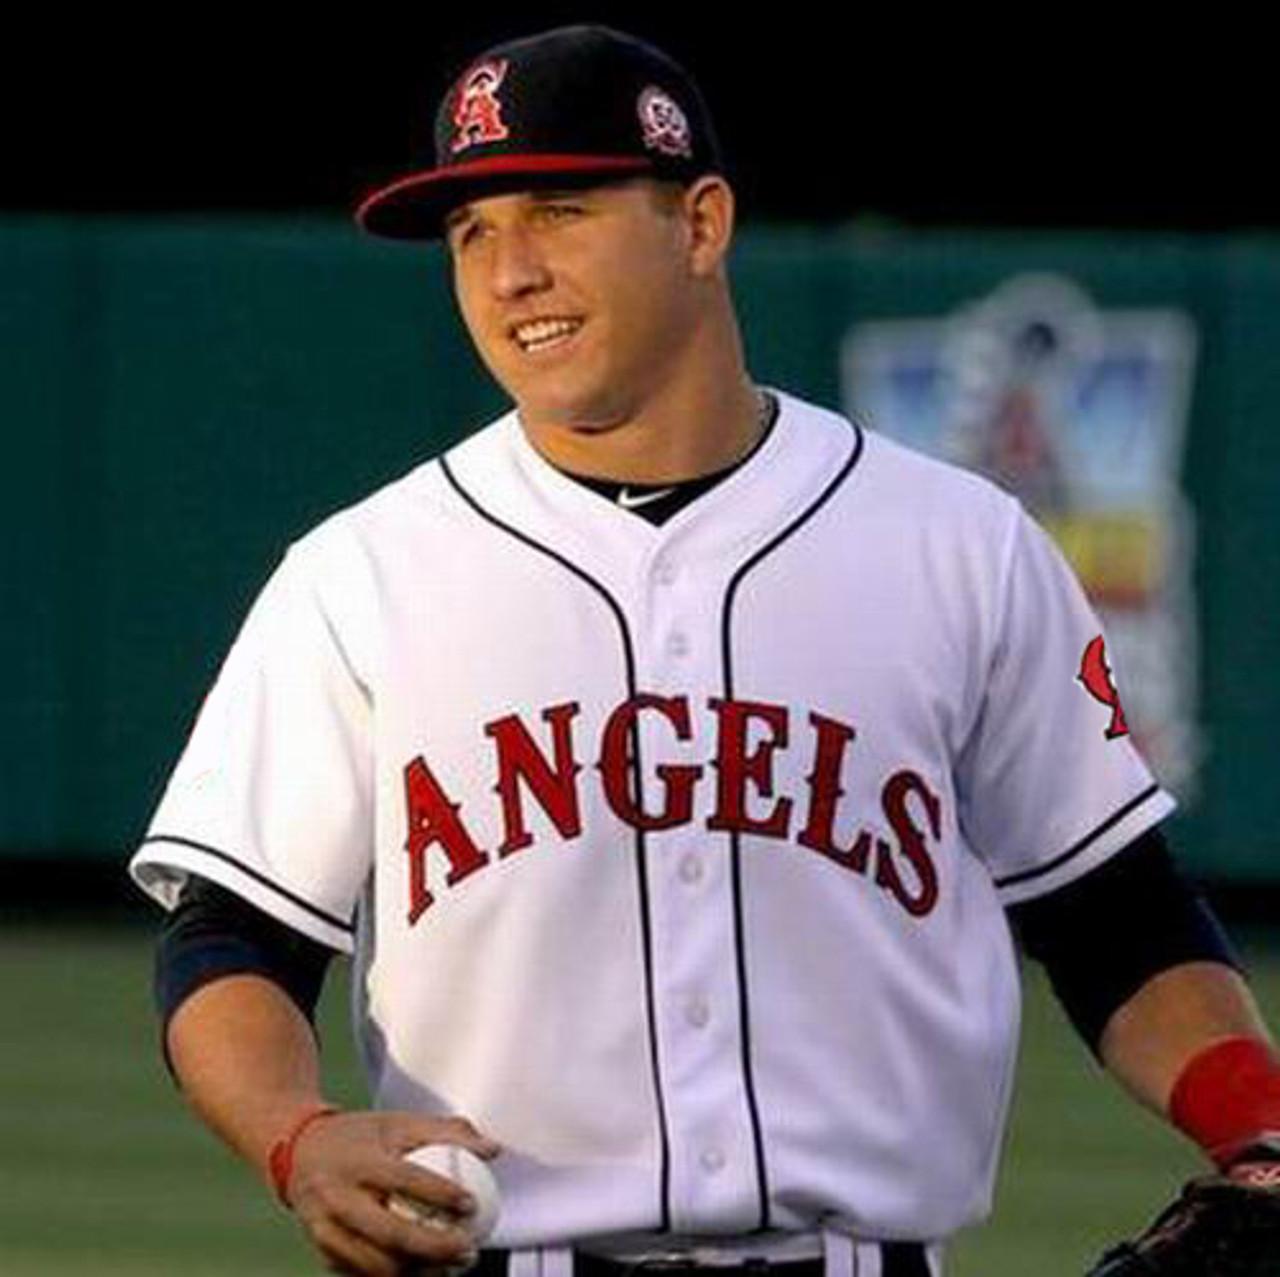 Mike Trout California Angels Men's Home White Throwback Jersey w/ Team Patch